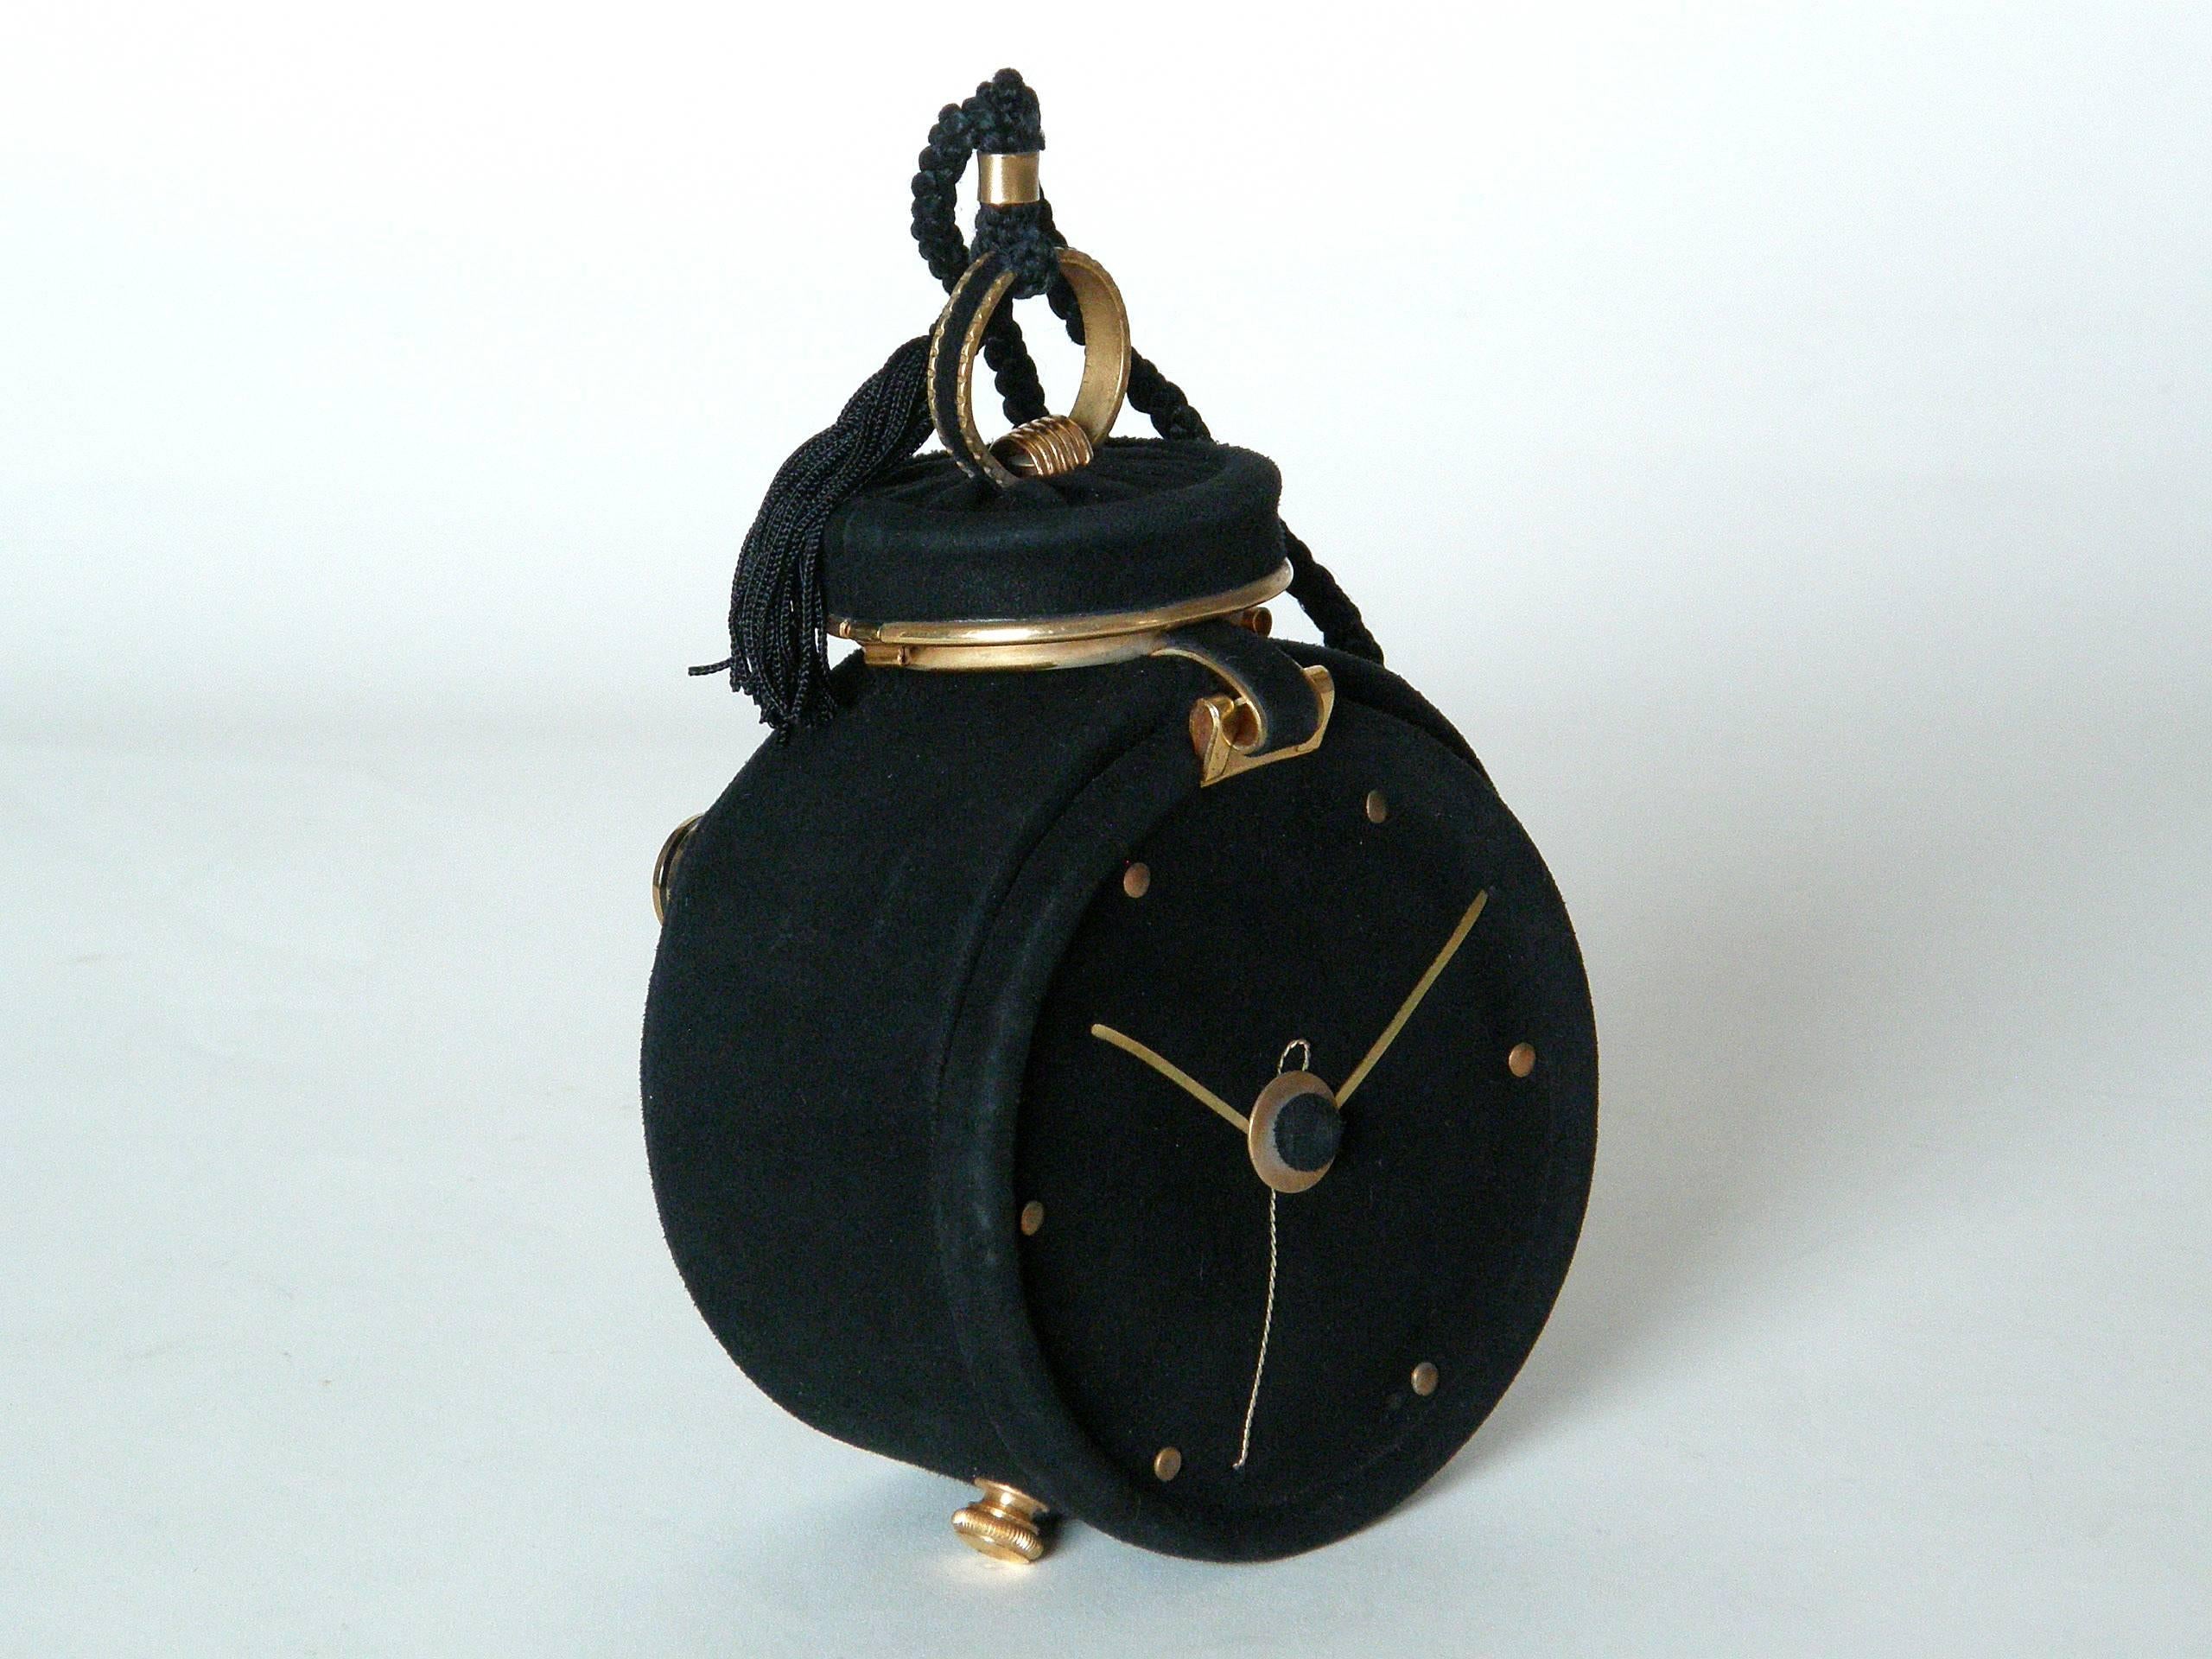 This marvelous figural handbag is shaped like an alarm clock. It's covered in a fine, black suede with details and accents in gold plated brass. The "bell" on top is a compact with mirror, and the "winding/time setting knob" on